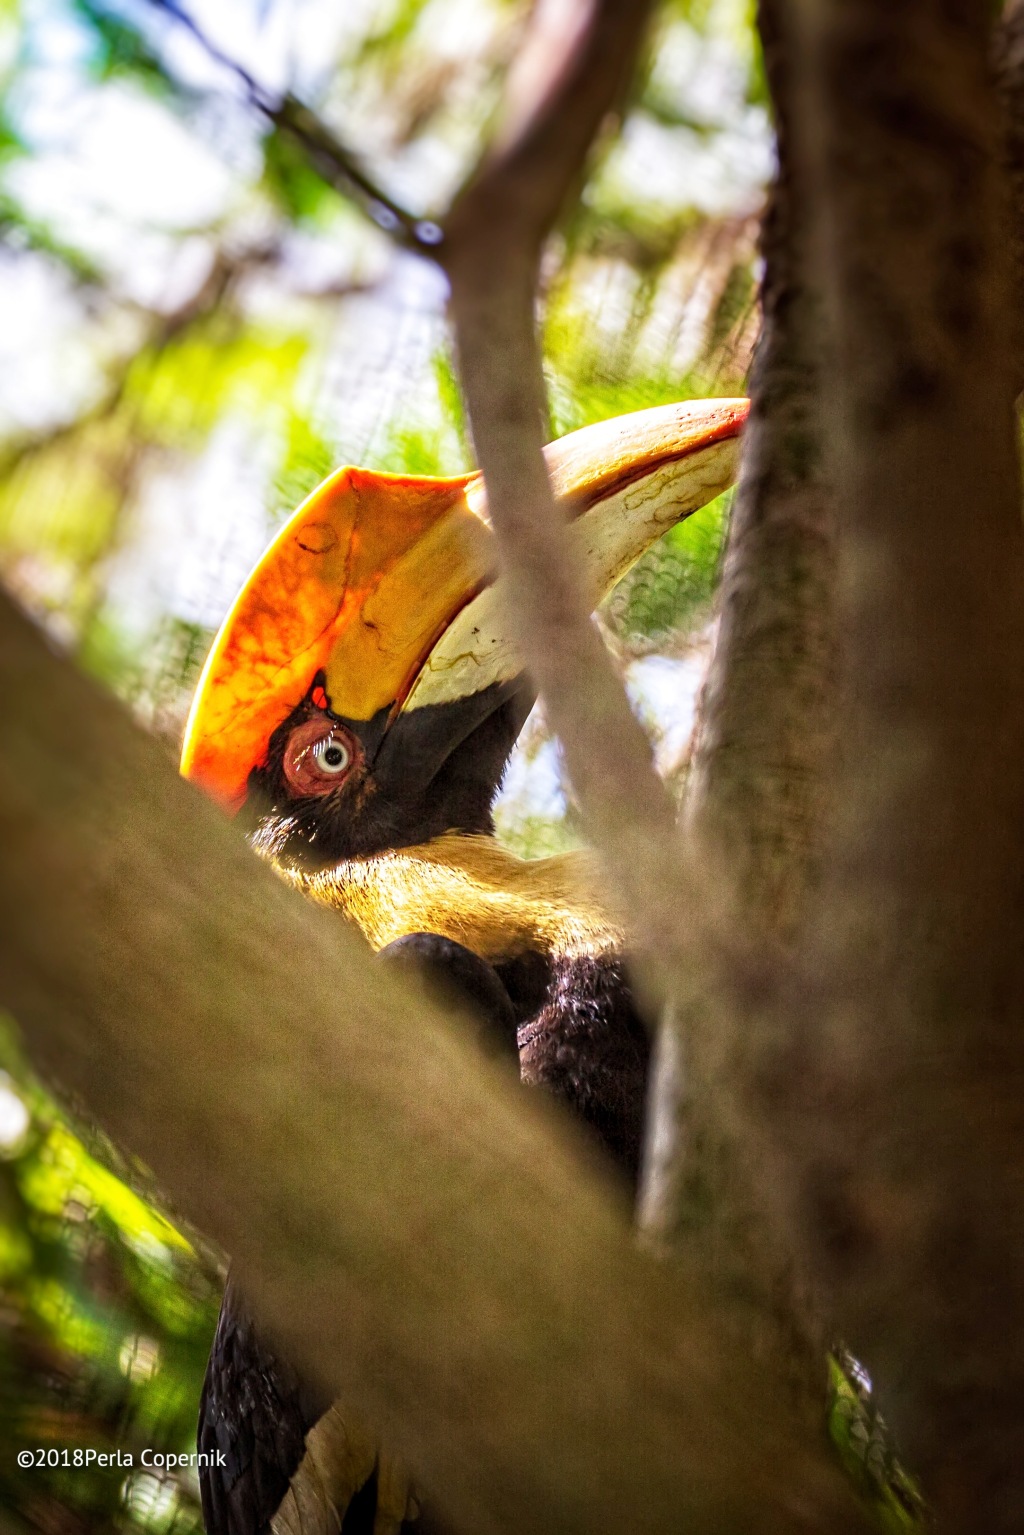 Part II:  Nuts About Hornbills: What’s So Special About Them?